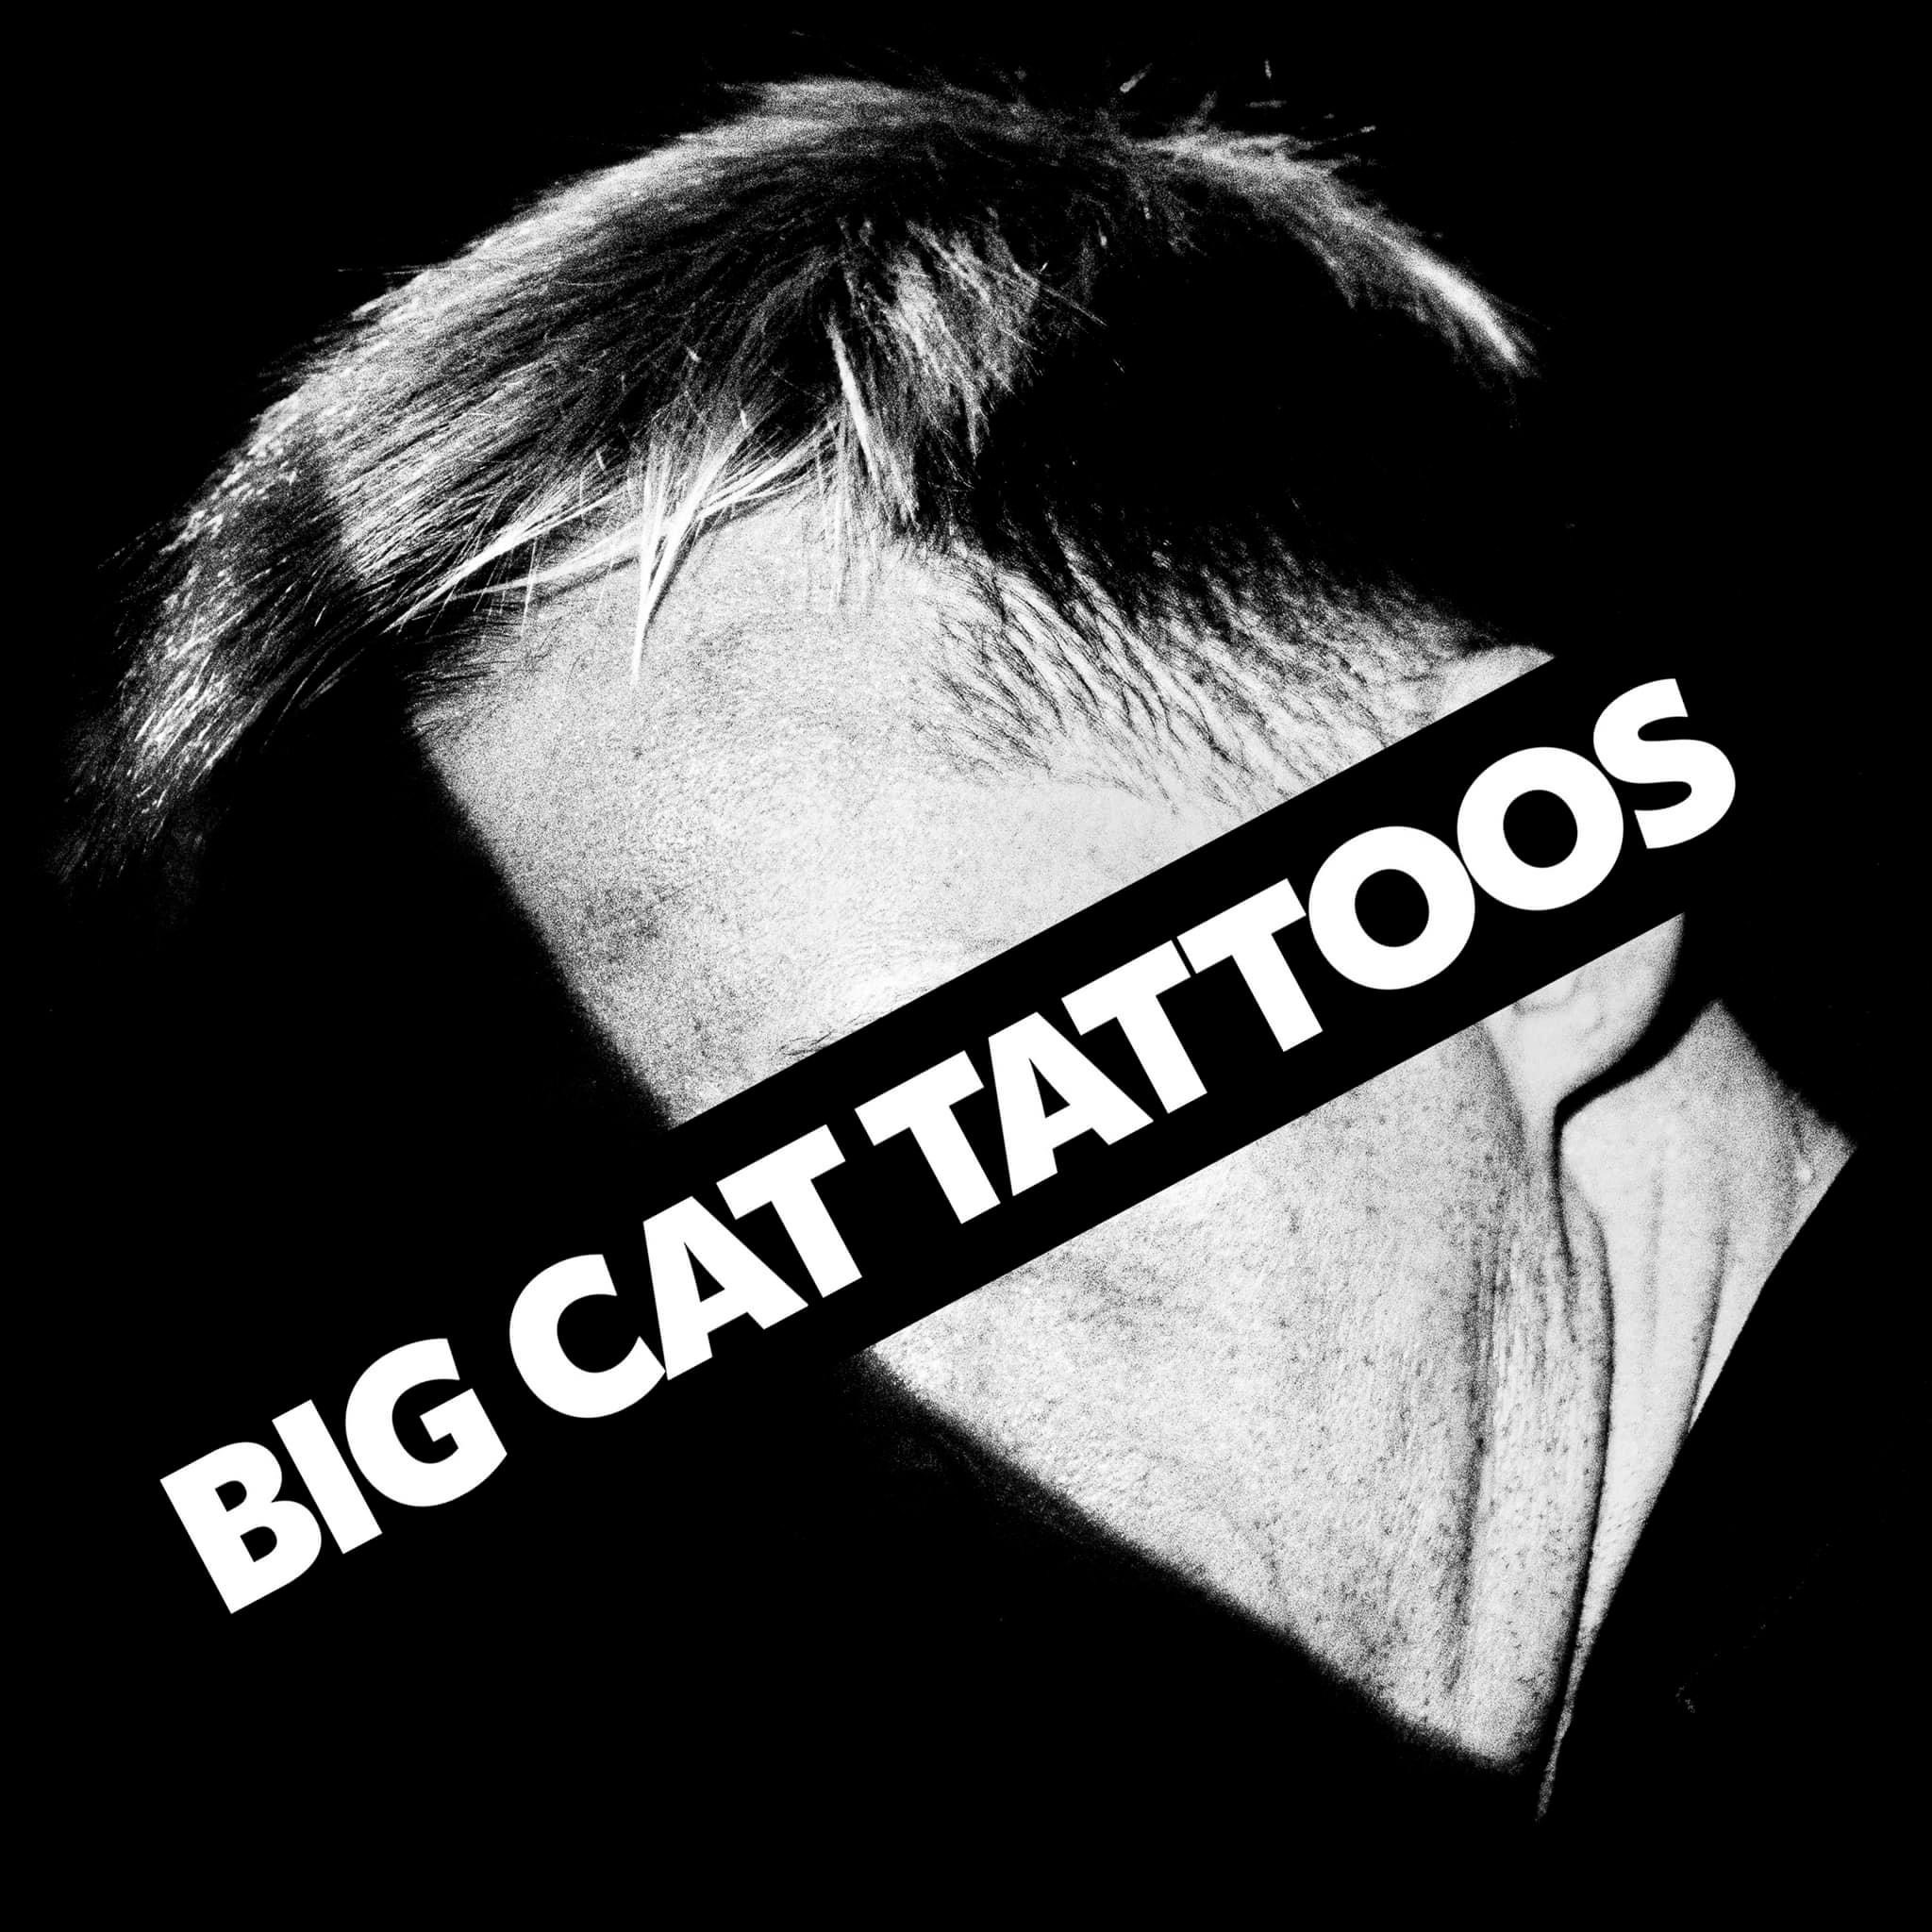 Big Cat Tattoos And A Firmer Hand – New Music From Hamish Hawk